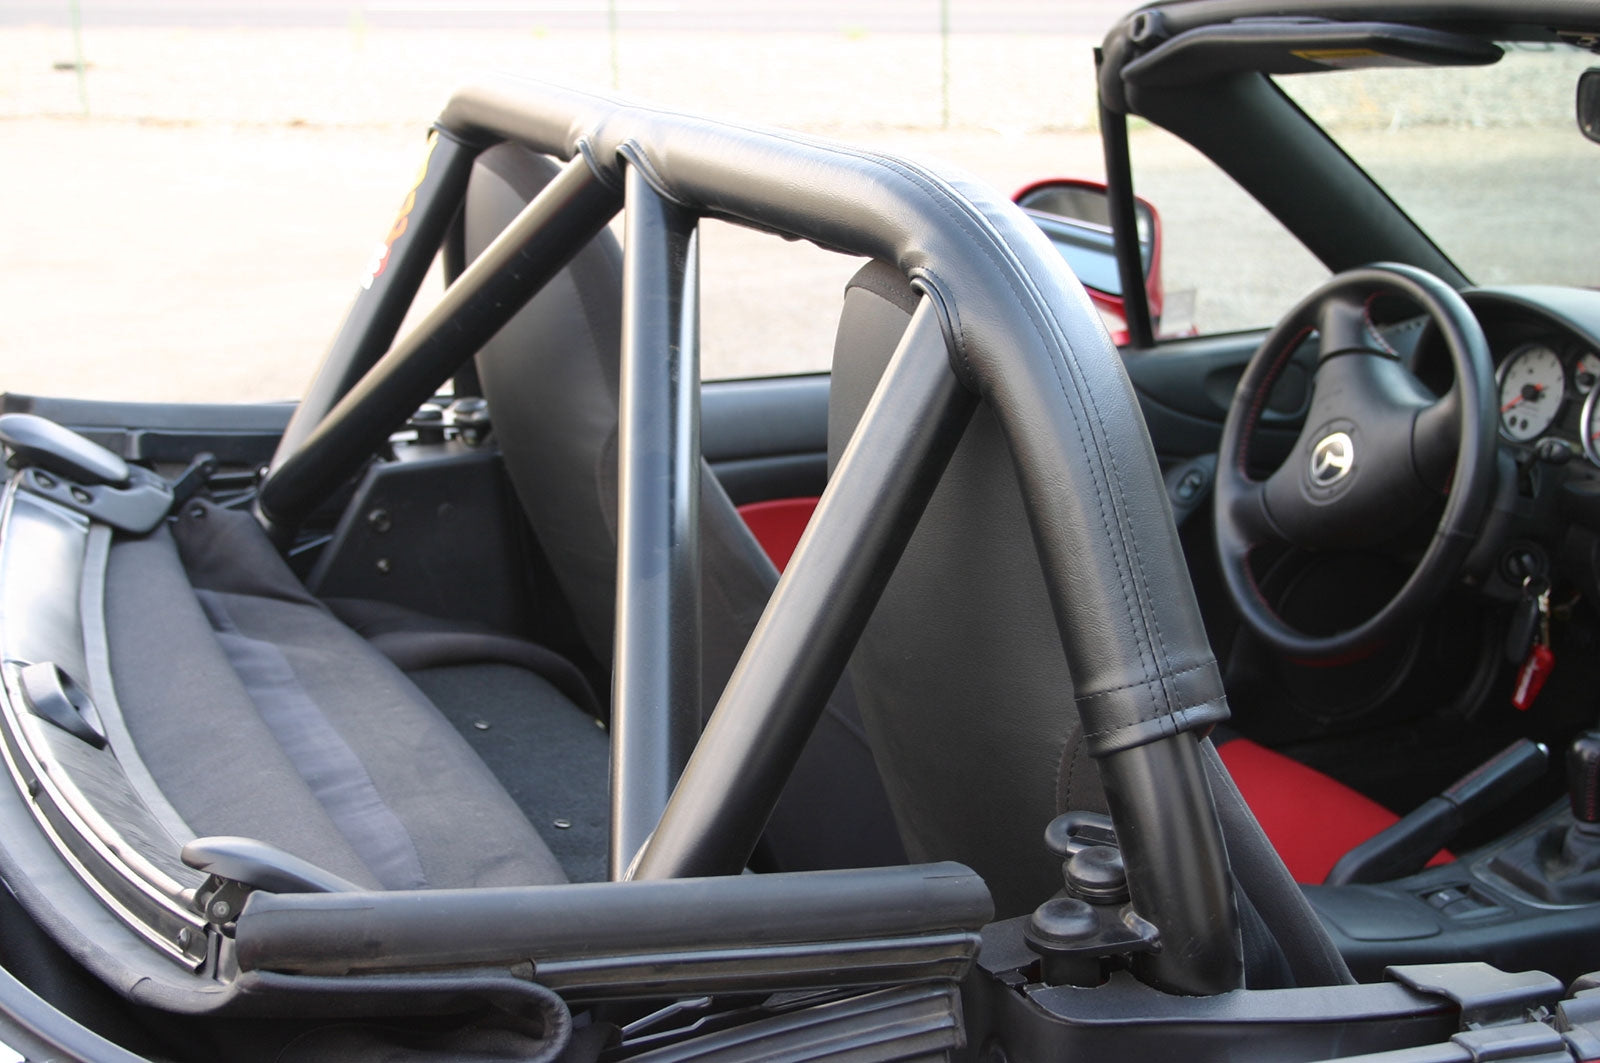 Make your bar safer and better looking at the same time. – Flyin' Miata